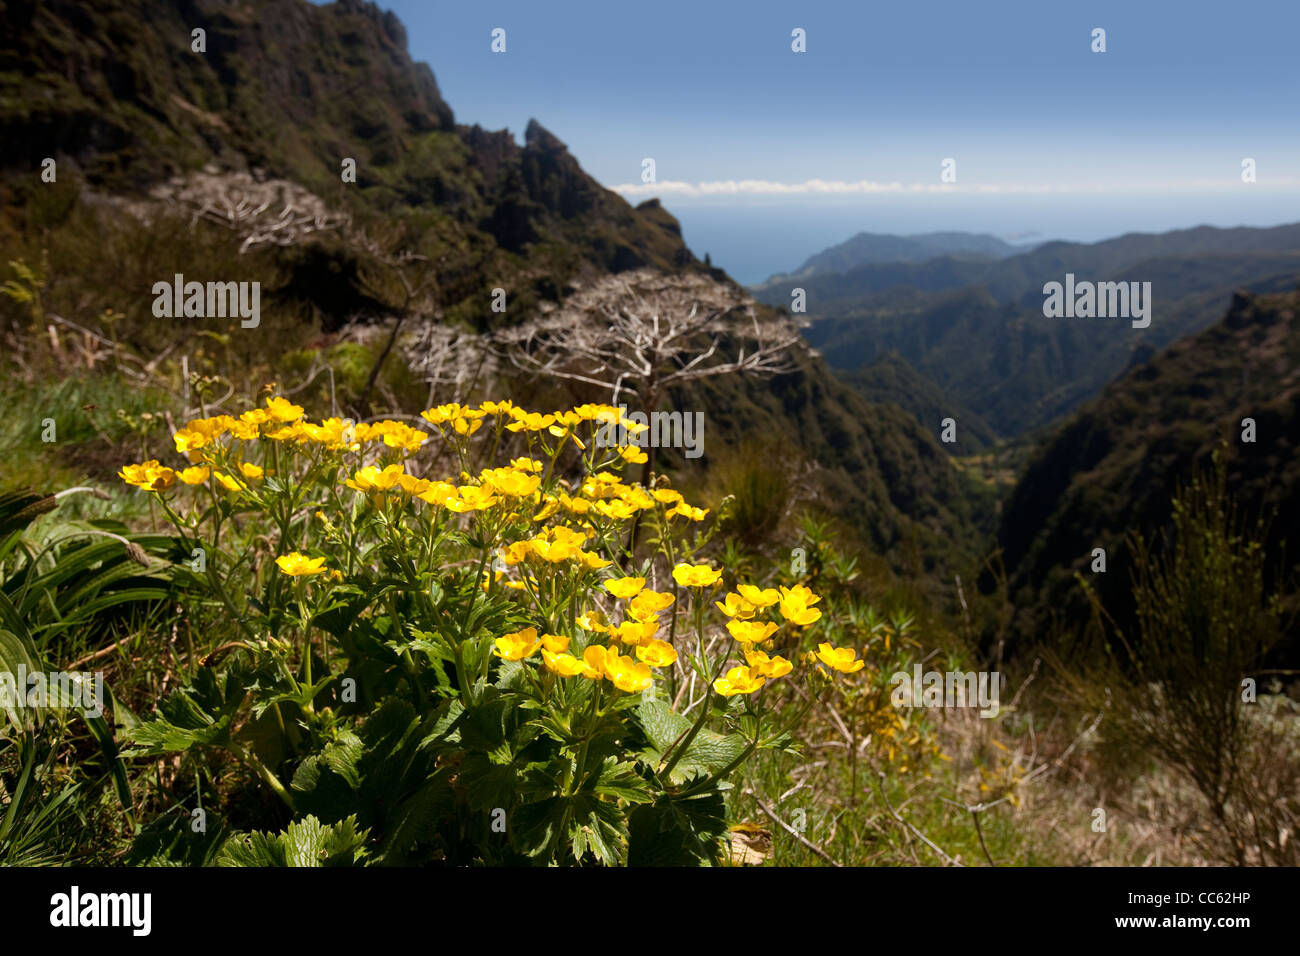 Madeira mountain scenery with a flower Stock Photo